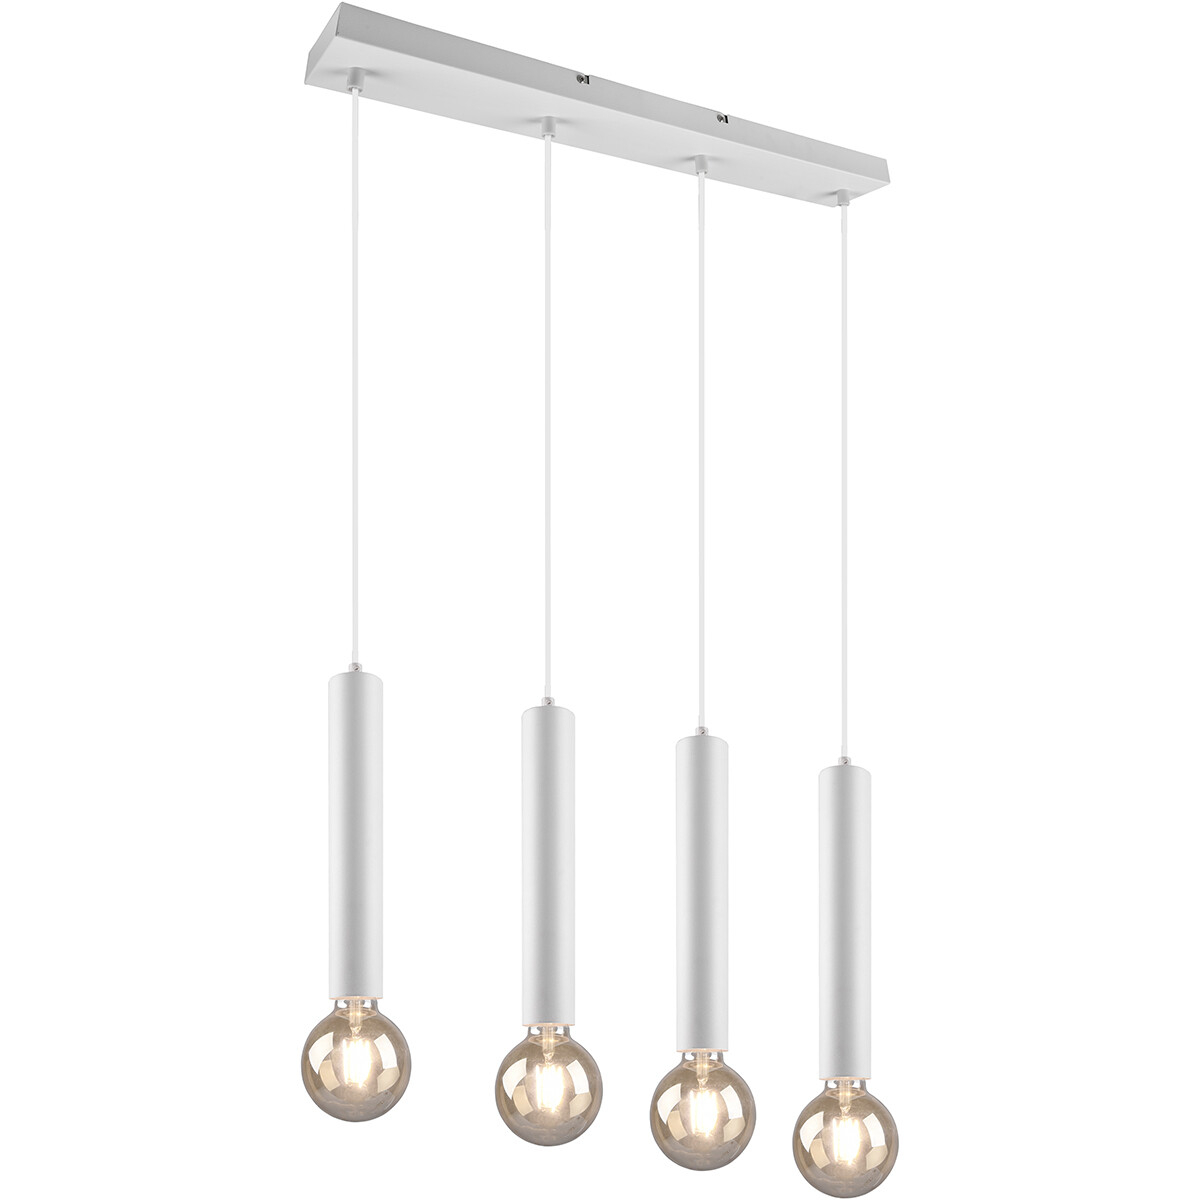 LED Hanglamp - Hangverlichting - Trion Claro - E27 Fitting - 4-lichts - Rond - Mat Wit - Aluminium product afbeelding